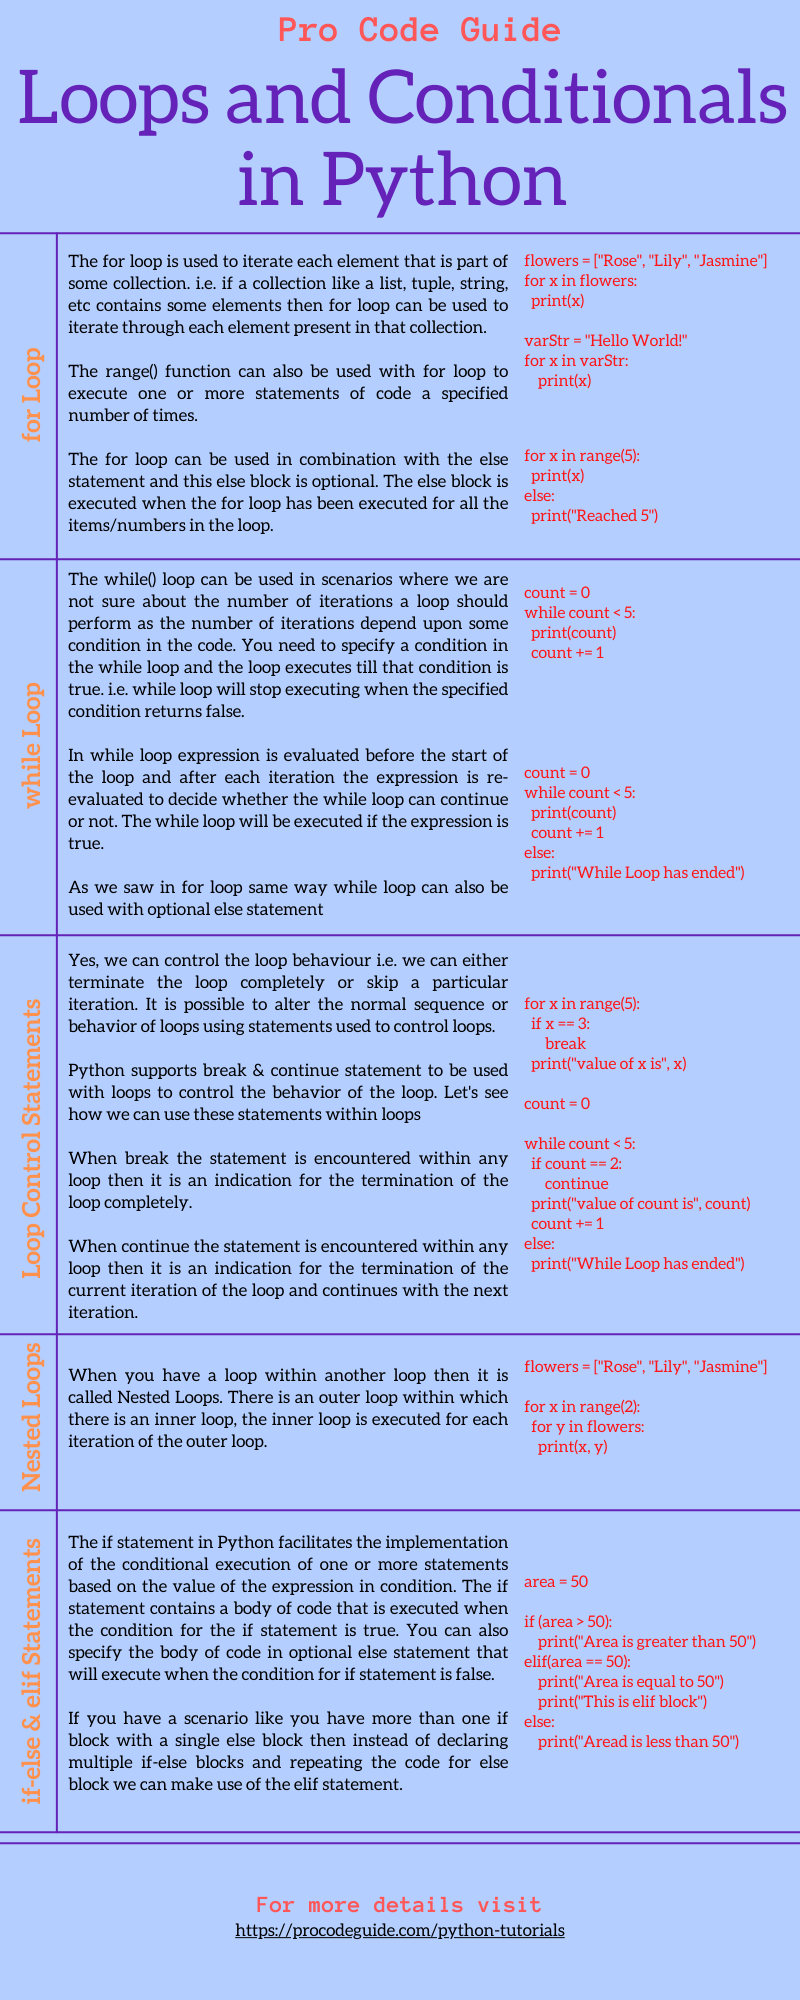 Loops & Conditionals in Python - Infographic